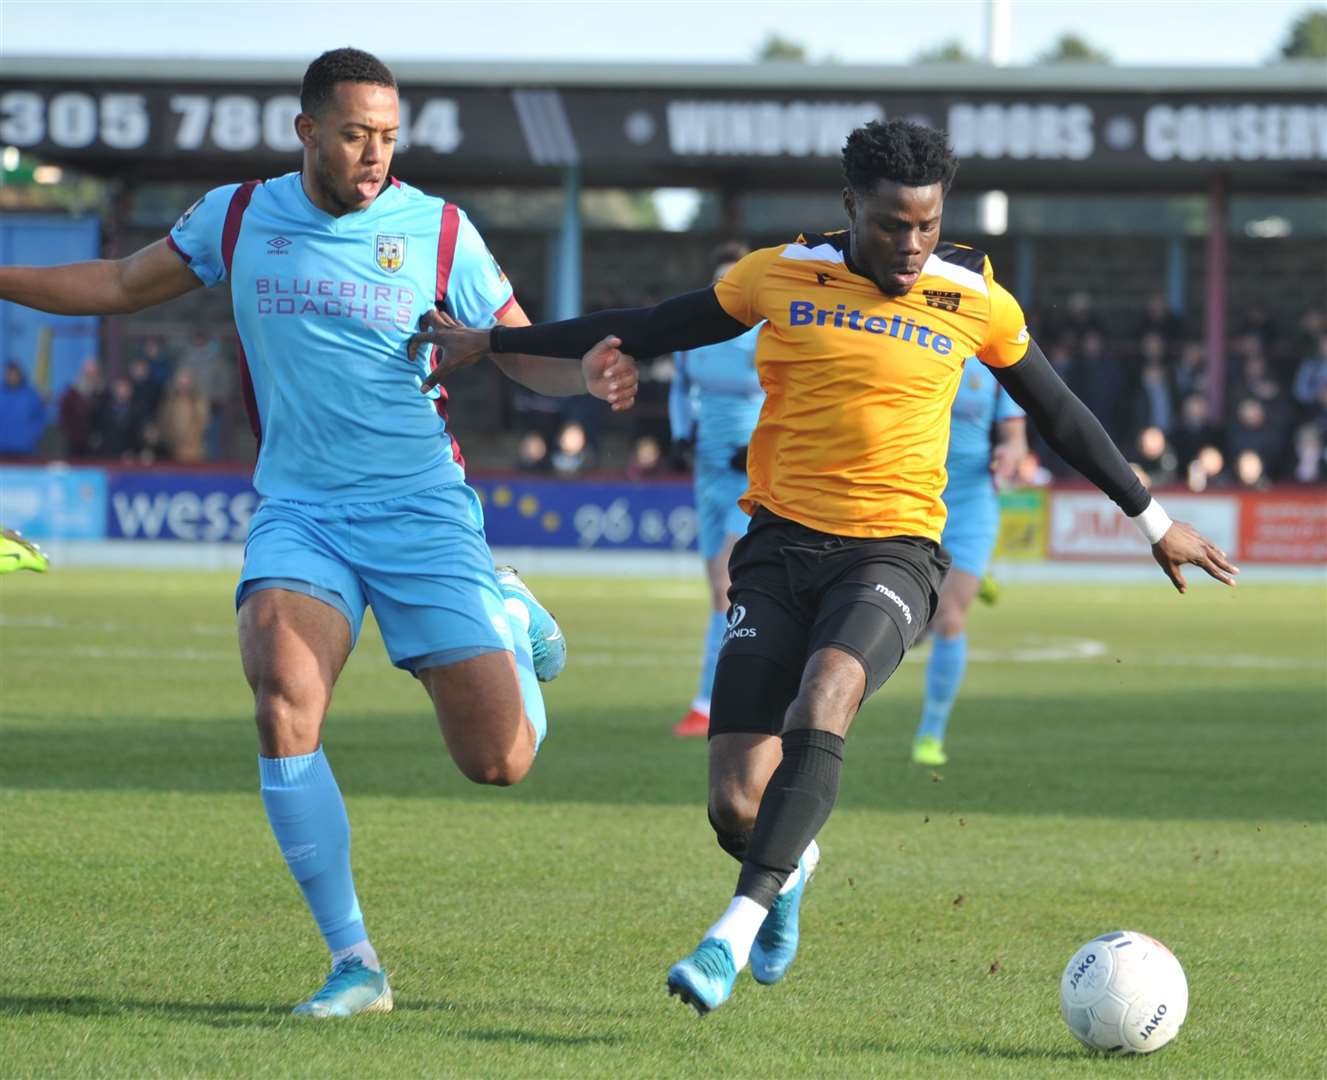 Maidstone lost 5-1 at Weymouth Picture: Steve Terrell (30782658)